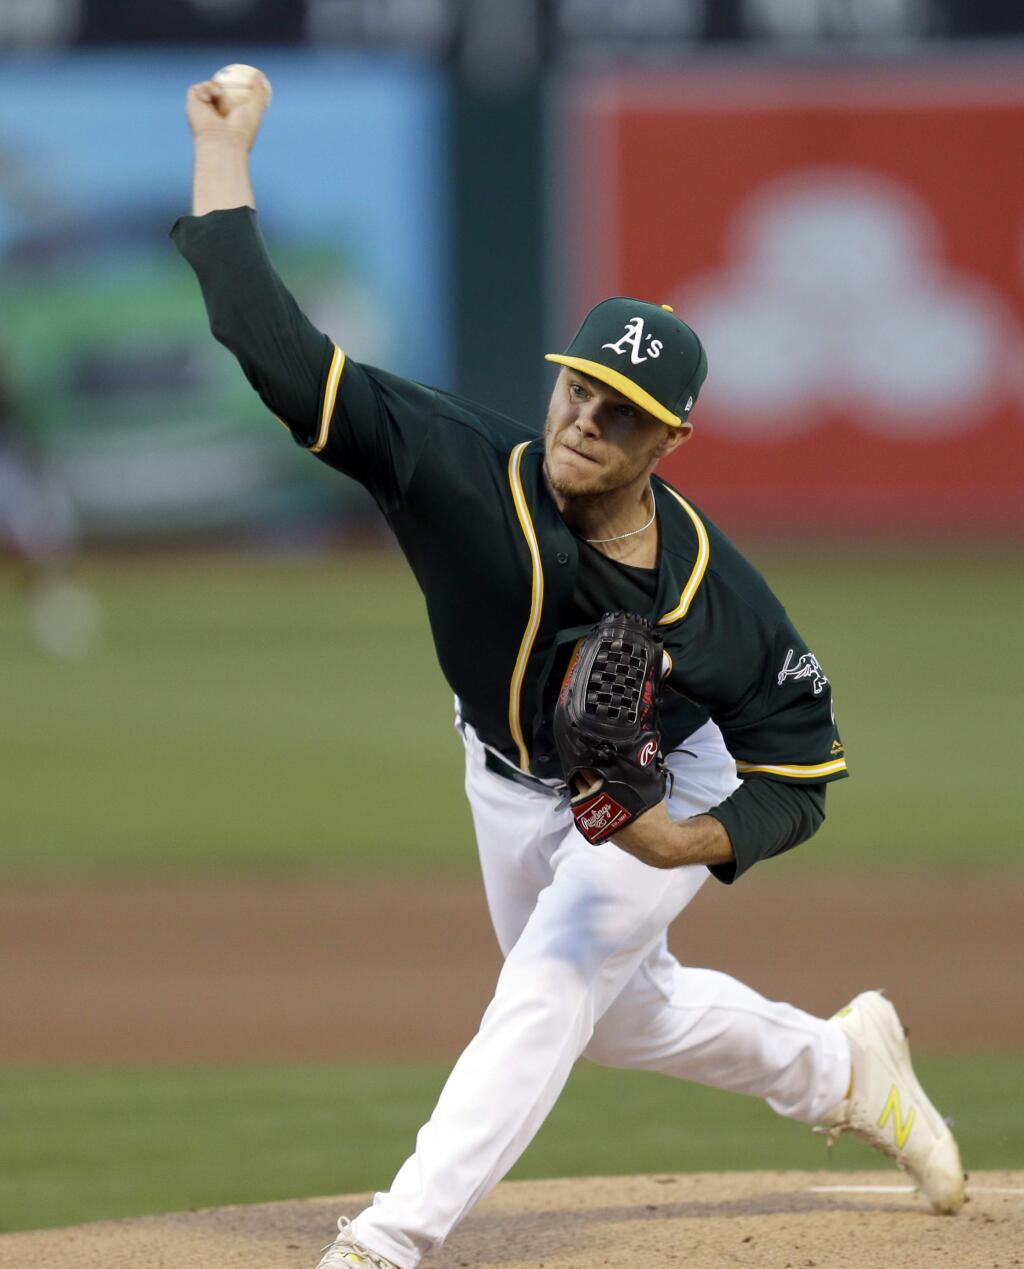 Oakland Athletics pitcher Sonny Gray works against the Cleveland Indians during the first inning Friday, July 14, 2017, in Oakland. (AP Photo/Ben Margot)